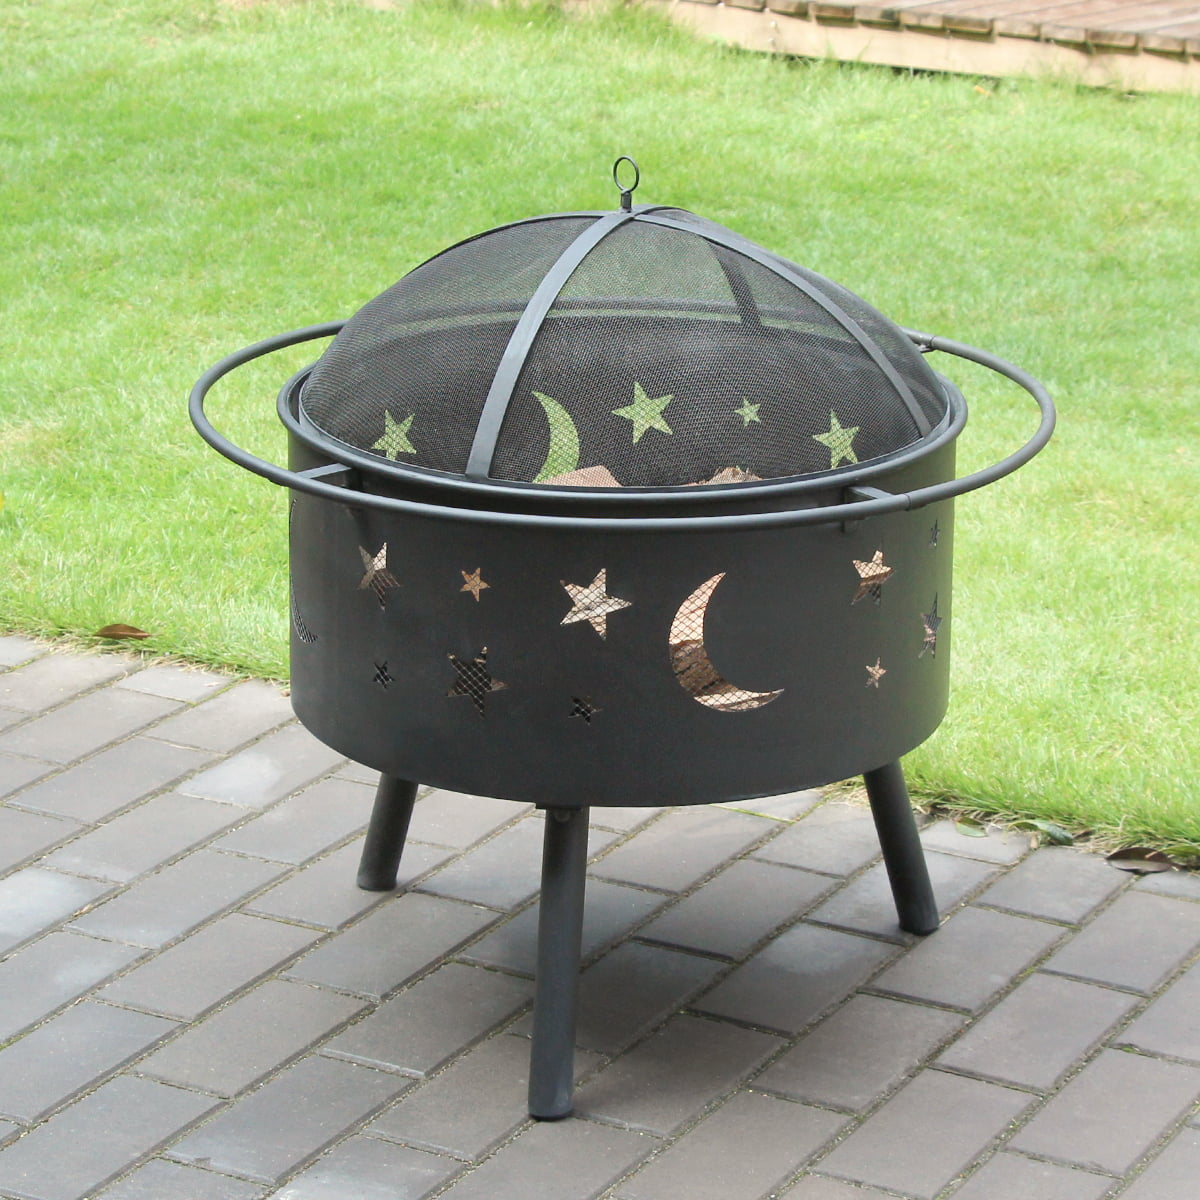 Outdoor Fire Pit With Cooking Grate 30, Heavy Fire Pit